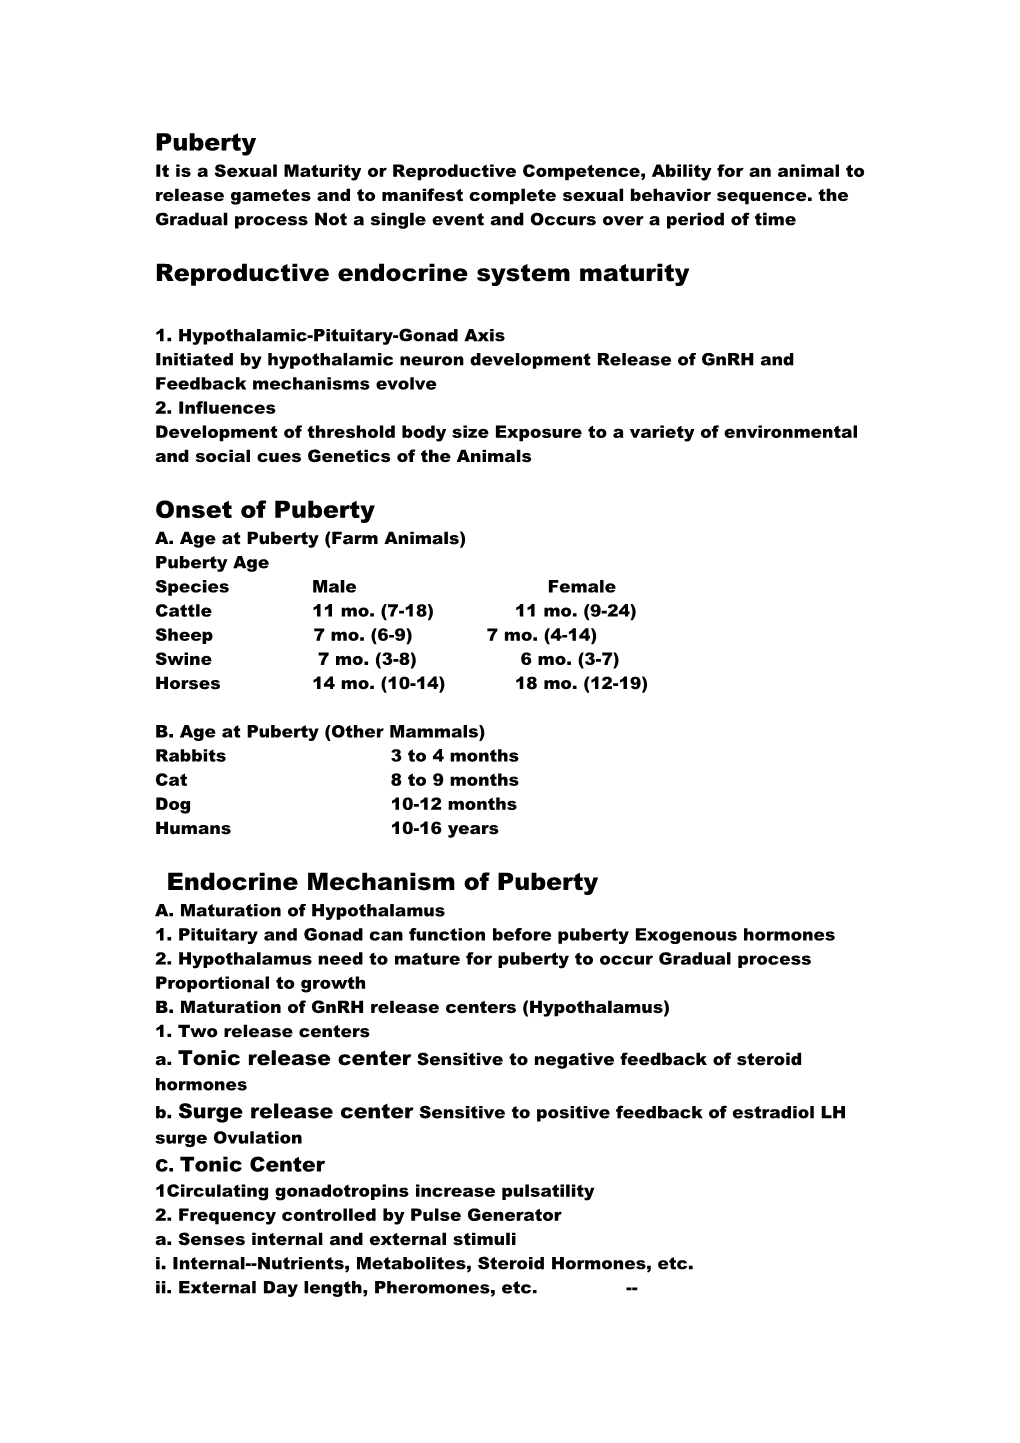 Reproductive Endocrine System Maturity